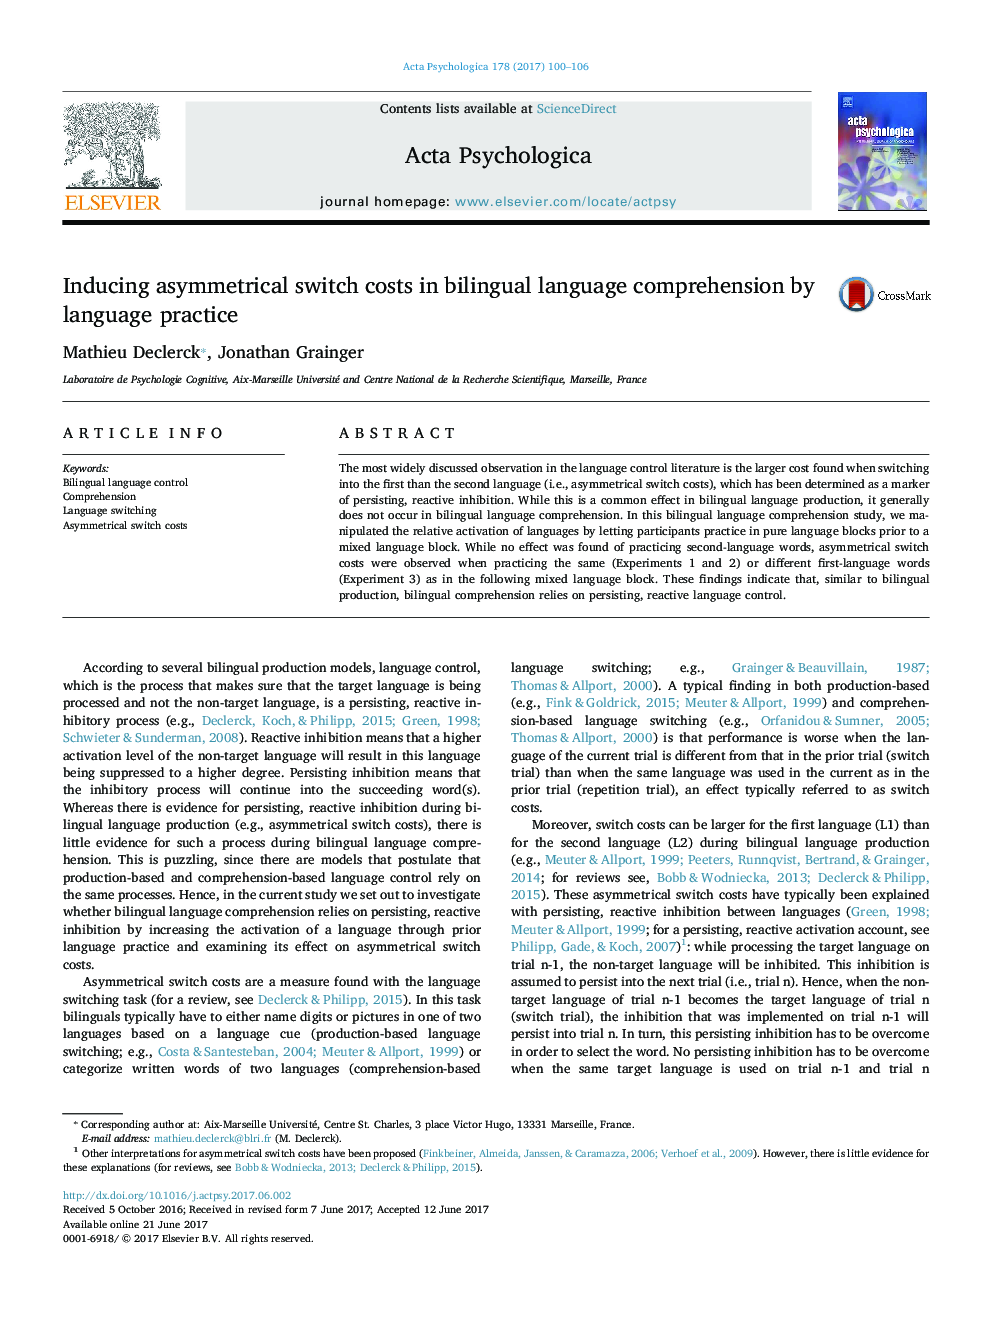 Inducing asymmetrical switch costs in bilingual language comprehension by language practice